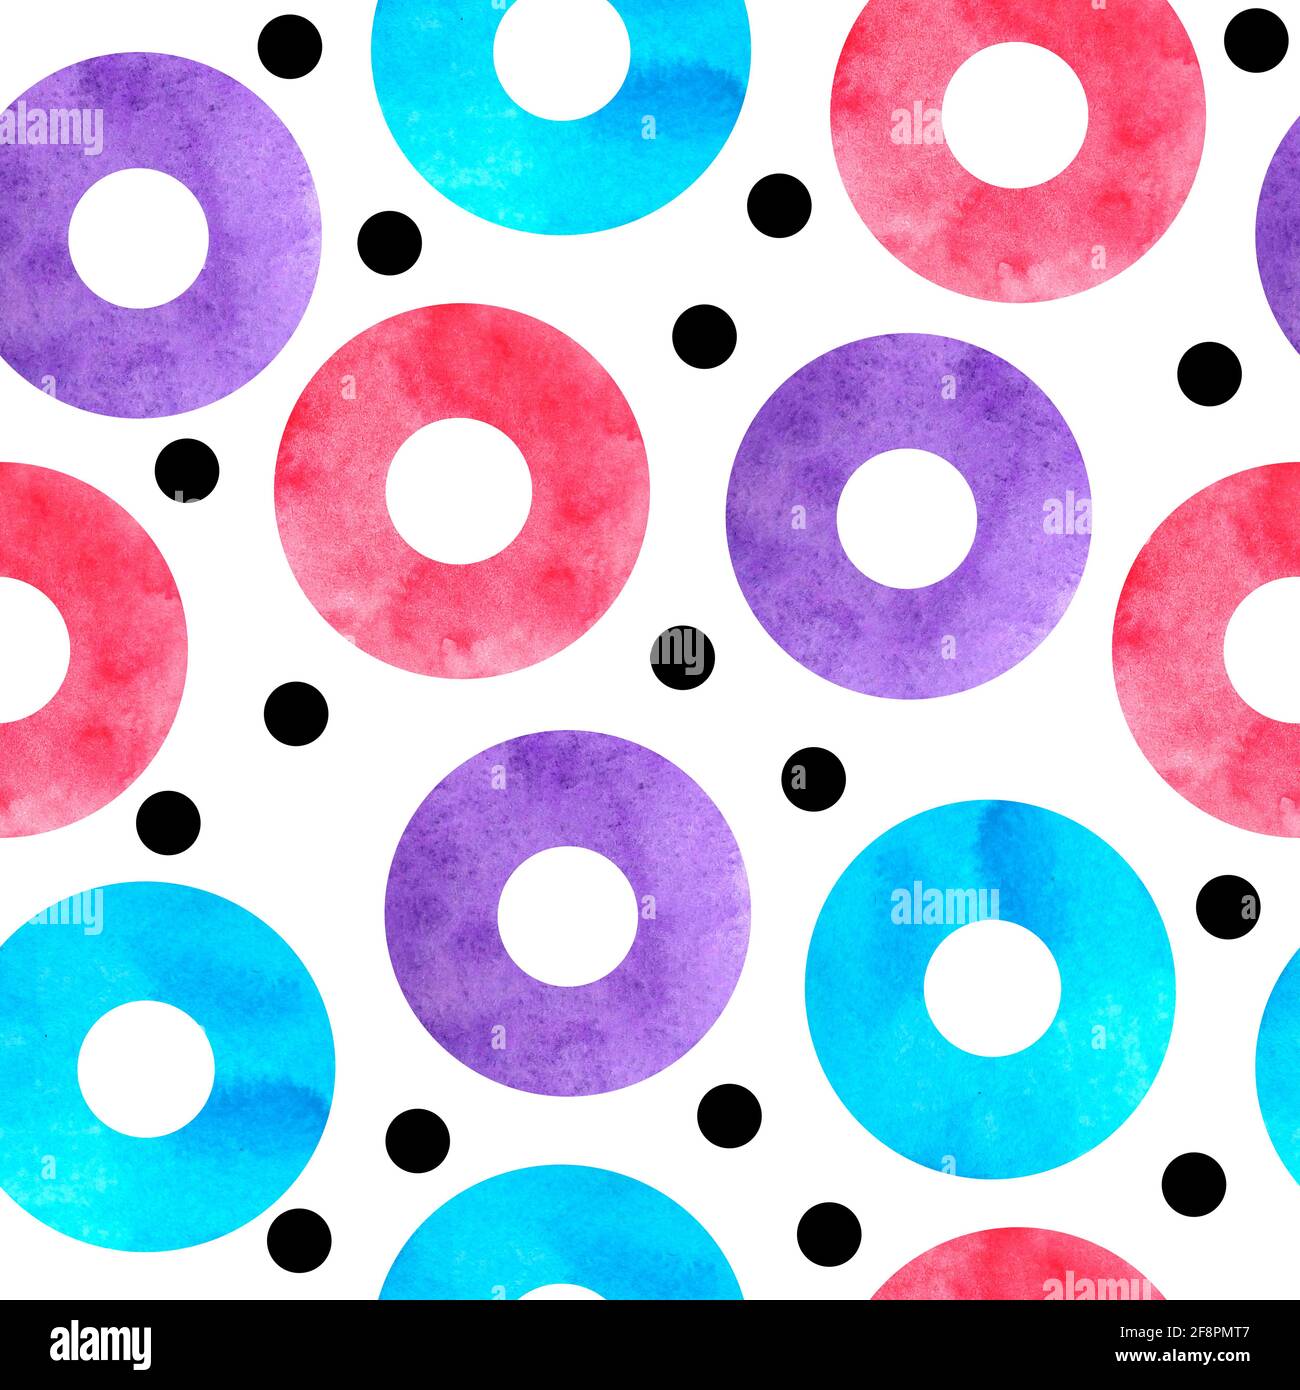 Watercolor seamless hand drawn pattern of 90s 80s memphis abstract style. Bright blue yellow pink purple geometric circle zig zag elements, funky hipster design for textile fashion wrapping paper Stock Photo